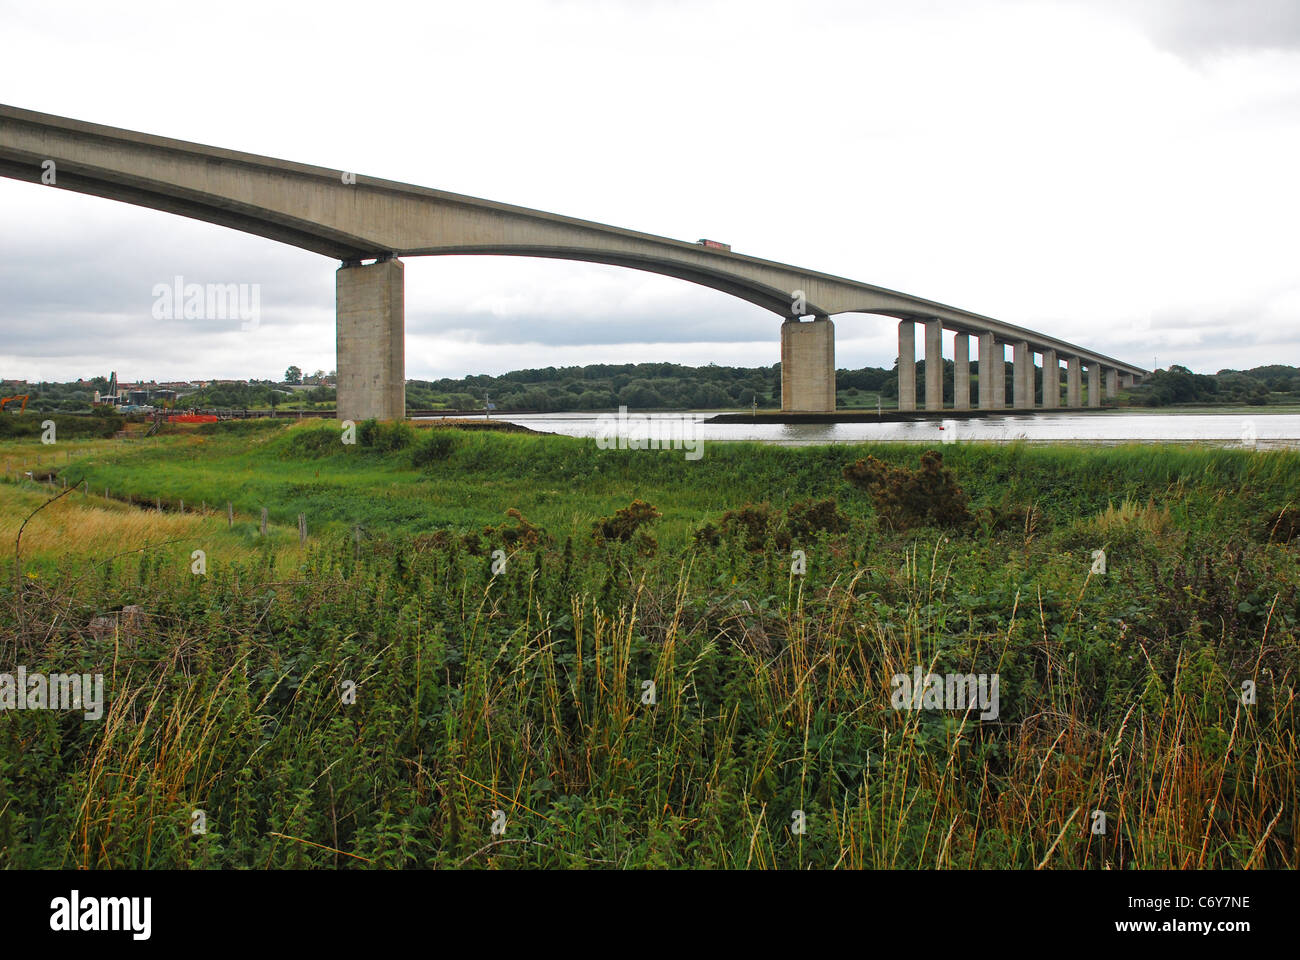 The Orwell Bridge carrying A14 main road over [River Orwell] near Ipswich Suffolk England Stock Photo